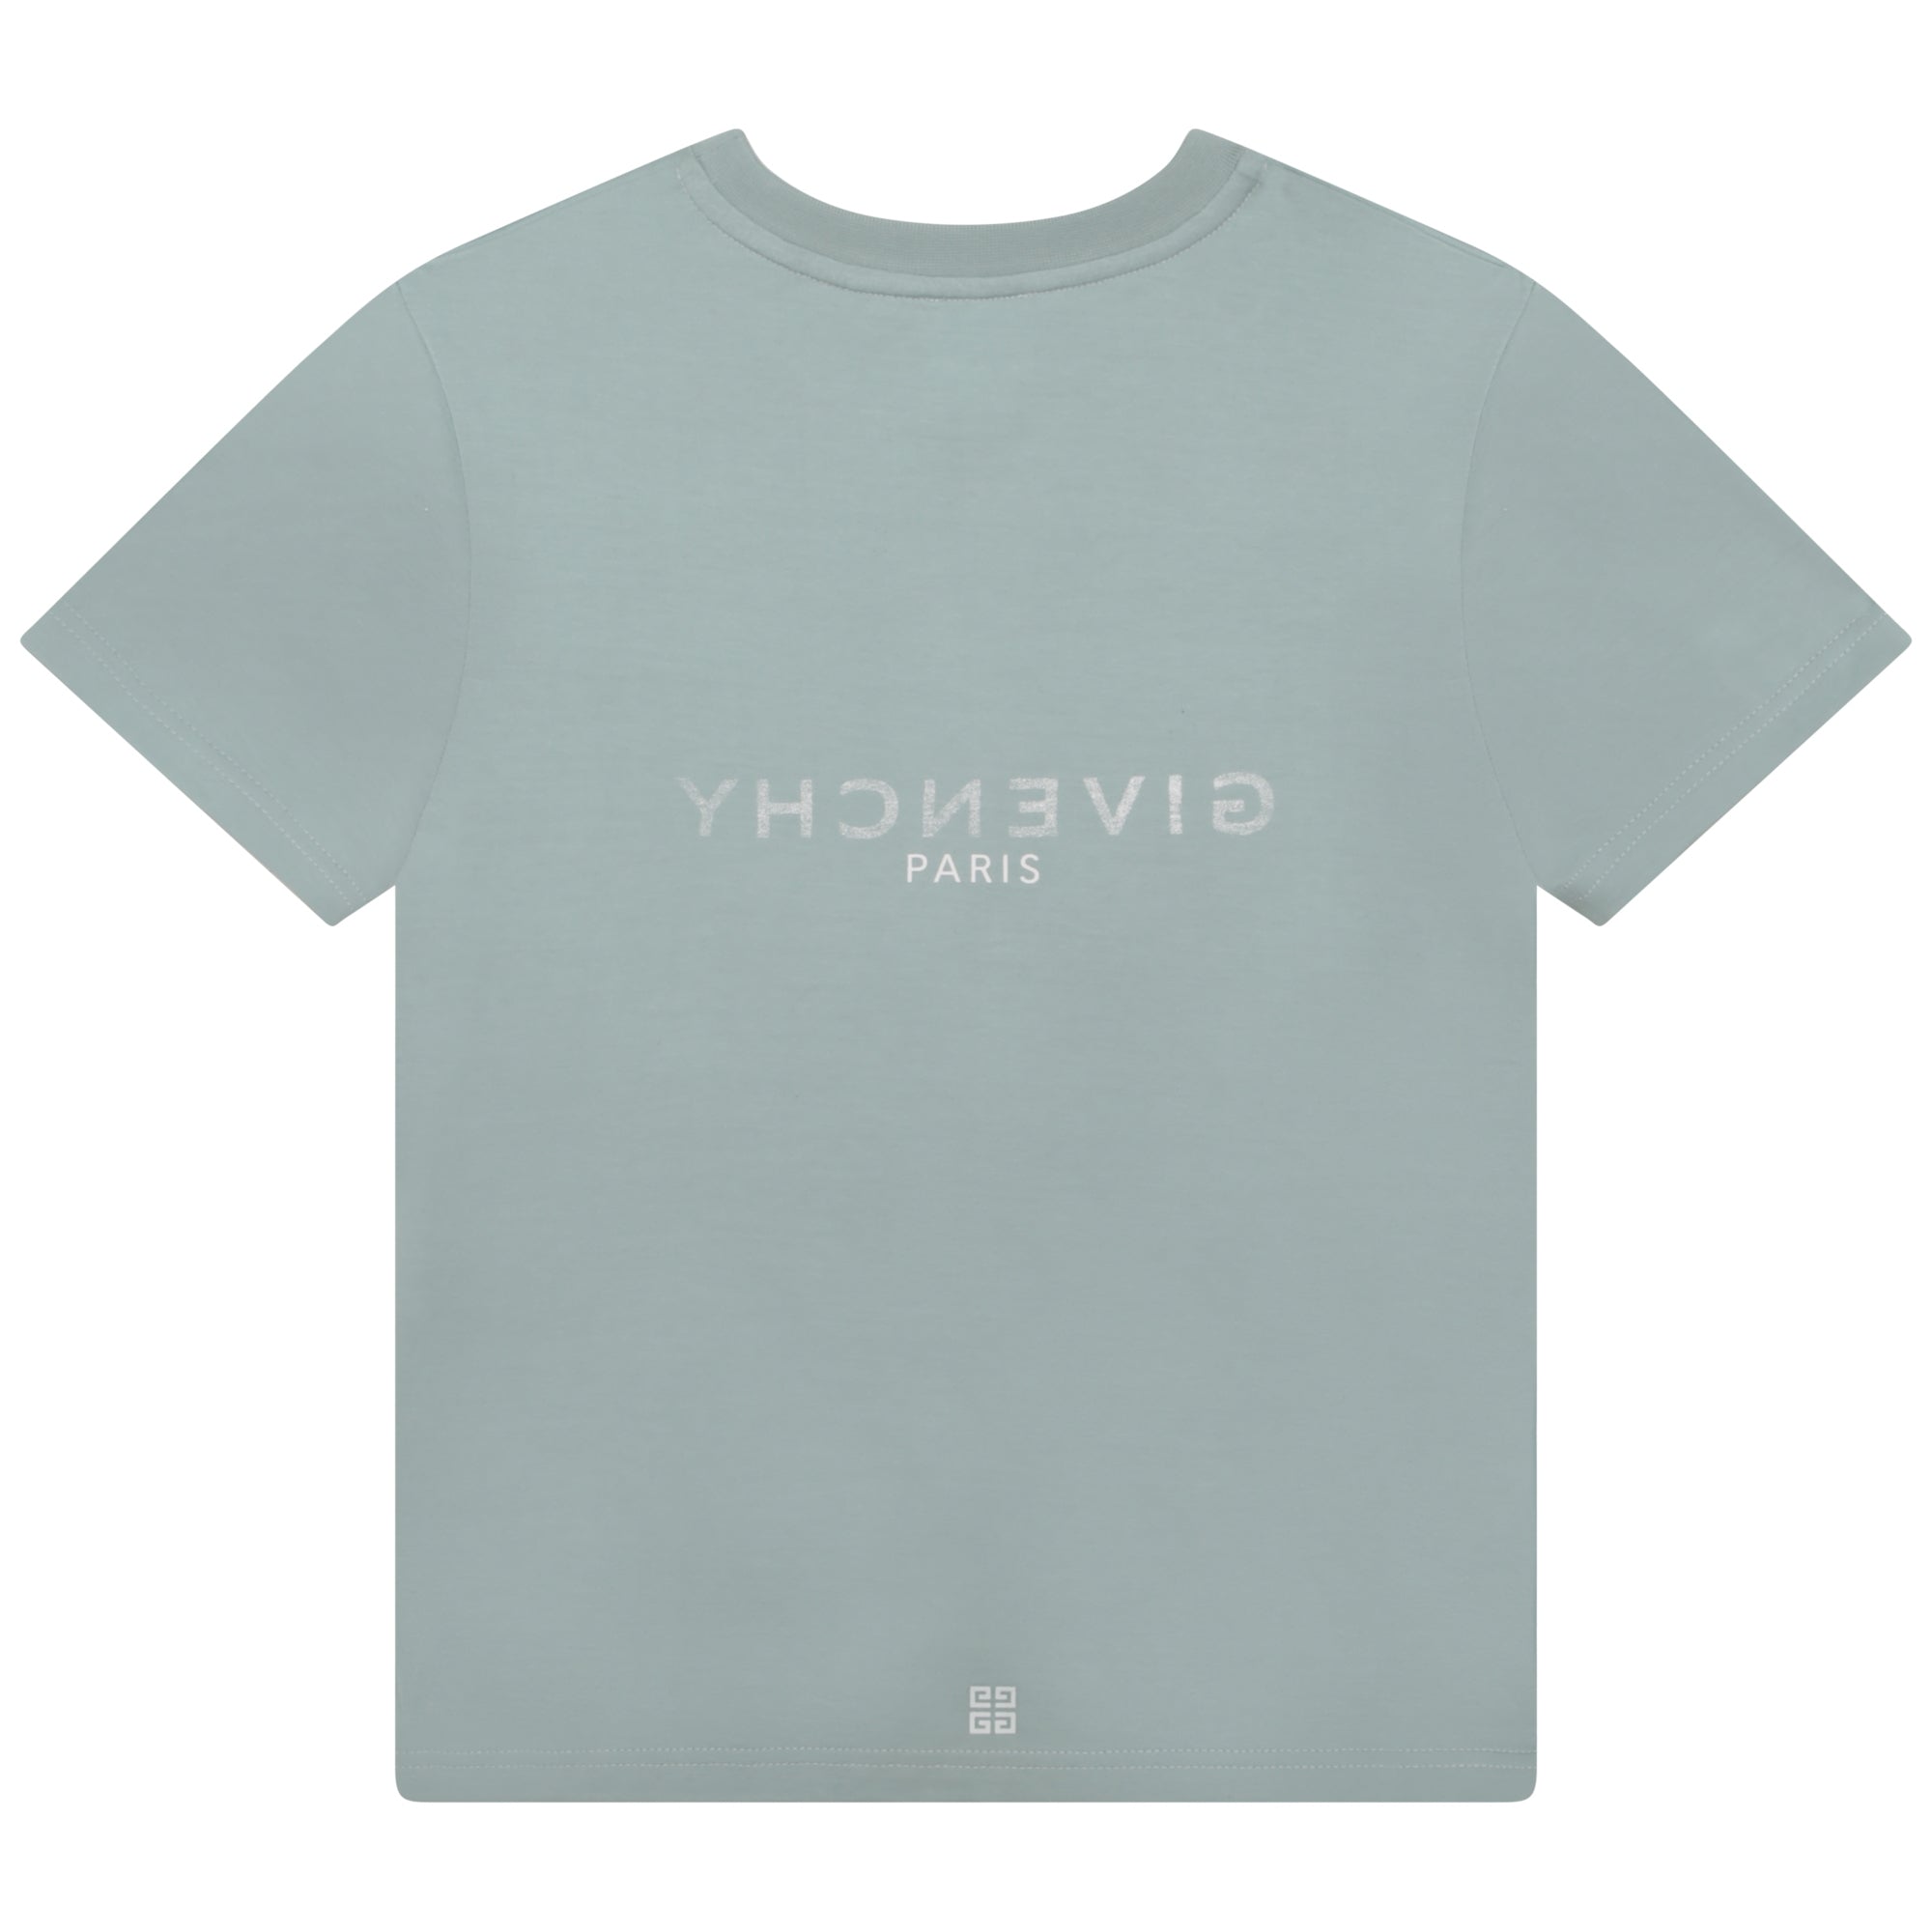 Givenchy Boys Classic Logo T-shirt in Turquoise Blue